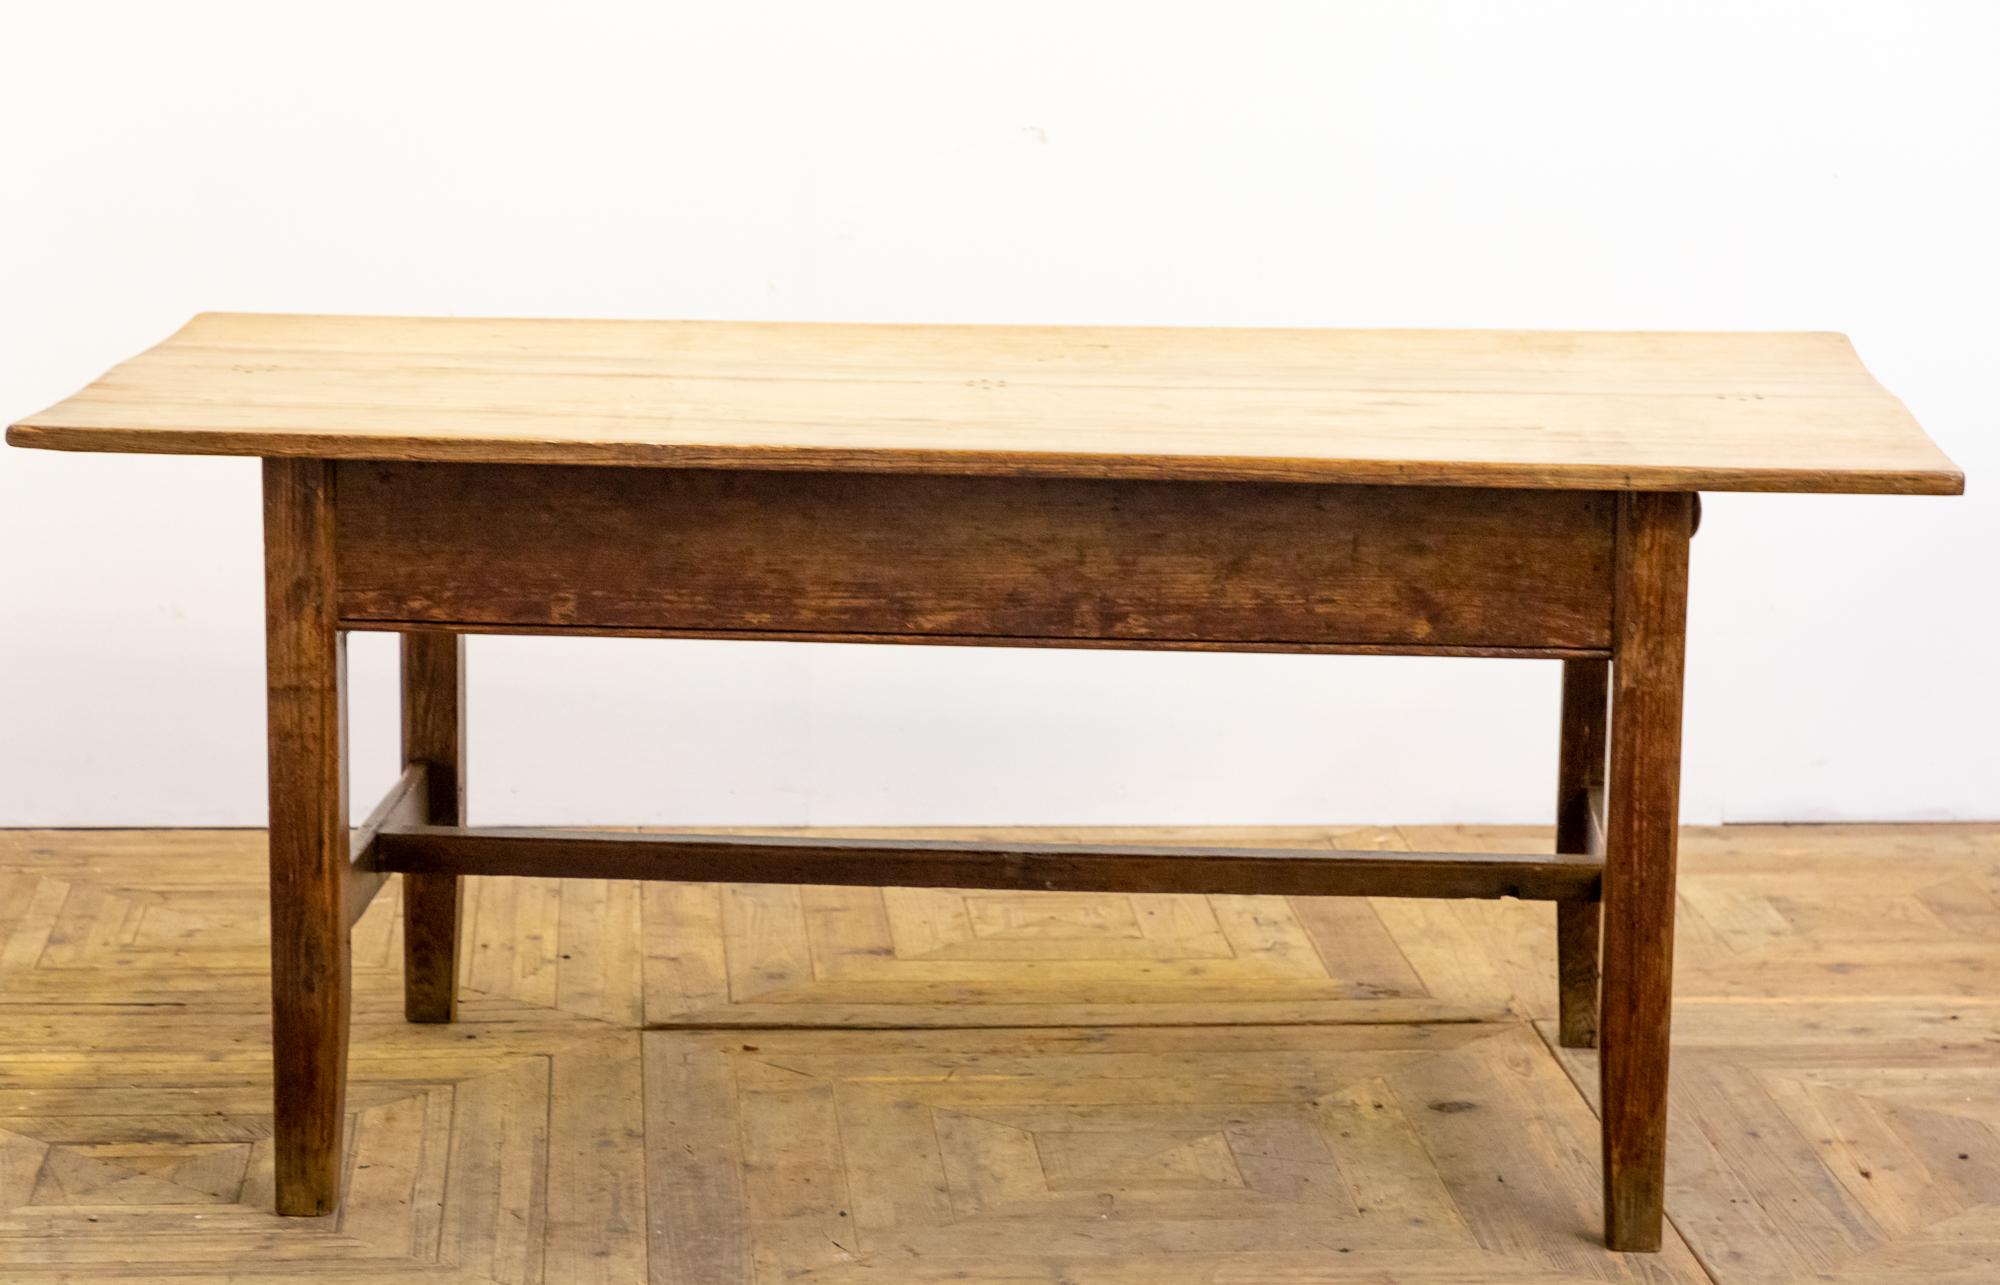 A stunning early 19th century welsh two plank top dairy table. The table is constructed from pine and retains the original finish to the frame. The top of traditional scrubbed pine is formed from two planks with the customary six dowel fixing. The